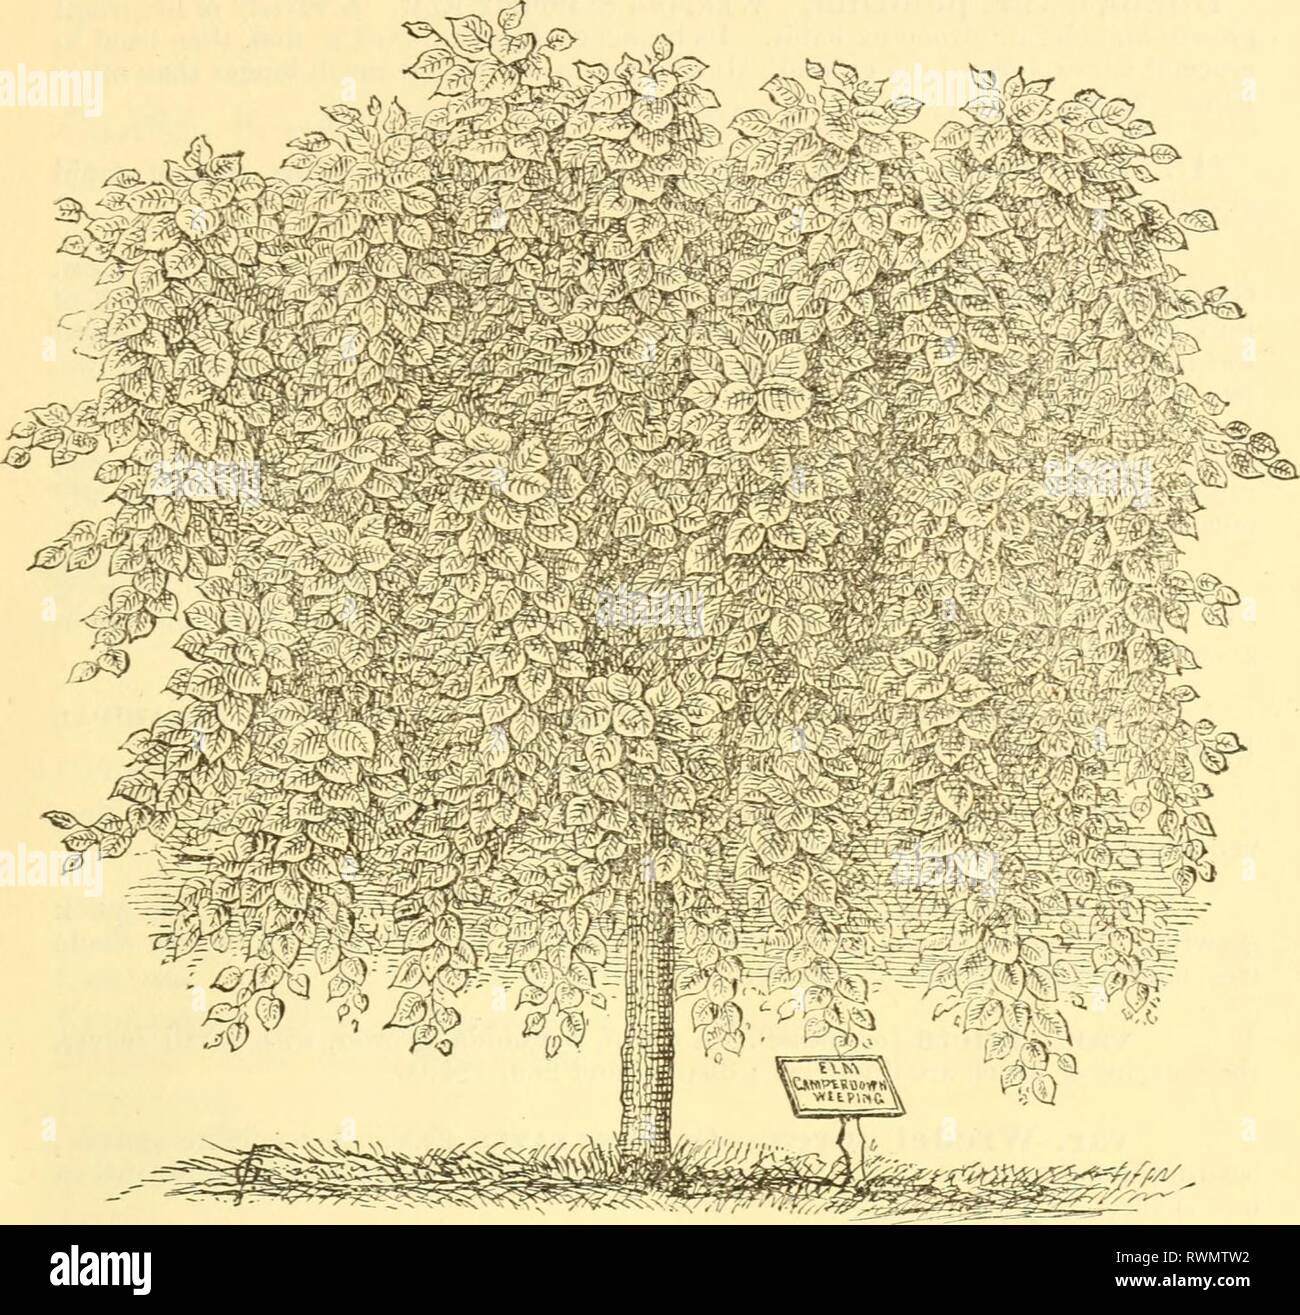 Ellwanger & Barry's catalogue  Ellwanger & Barry's catalogue : ornamental trees, shrubs, etc ellwangerbarrysc1888ellw Year: 1888  ORNAMEyTAL TREES, SHRUBS, ETC. 45    CAMPERDOWN WEEPING ELM. Ulmus c. var. suberosa. English Cork-barked Elm. A tree of fine habit, young branches very corky ; leaves rough on both sides. $1.00. var. suberosa pendula. Weeping Cork-barked Elm. An or- namental drooping variety. $1.00. var. urticifolia. Xettle-Leayed Elm. A rapid-growing, hand- some variety, with long serrated and undulating leaves; unique and beautiful. $1.00. var. variegata argentea. Variegated Engli Stock Photo